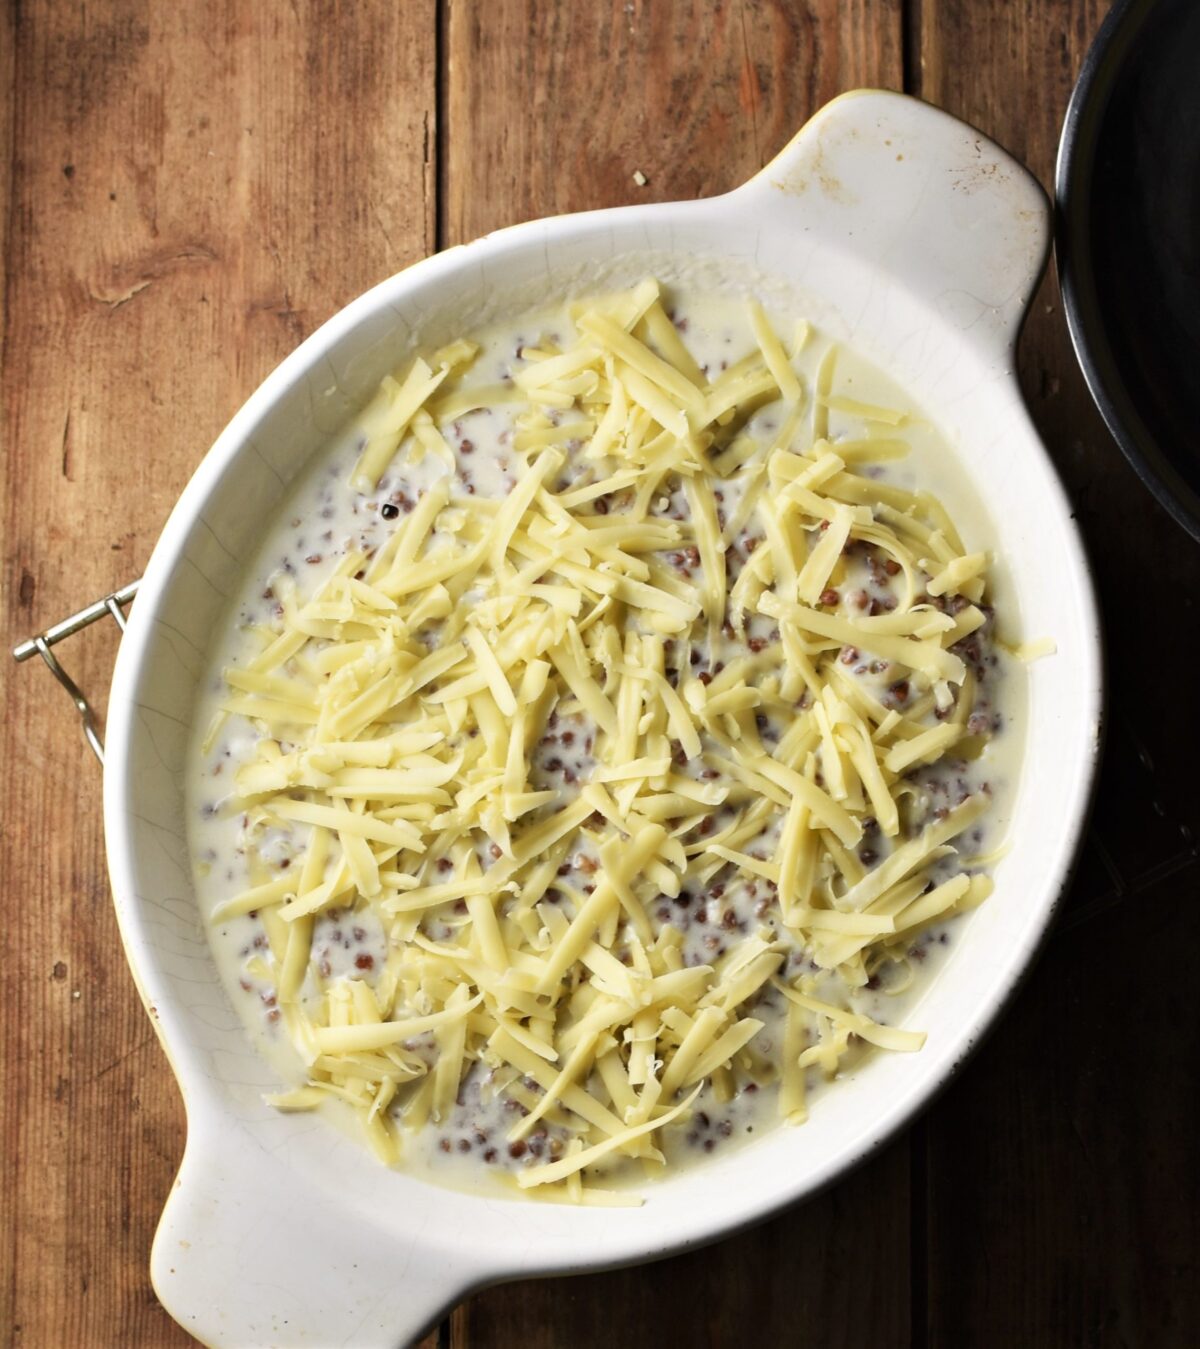 Buckwheat in white sauce with grated cheese on top in white oval dish.